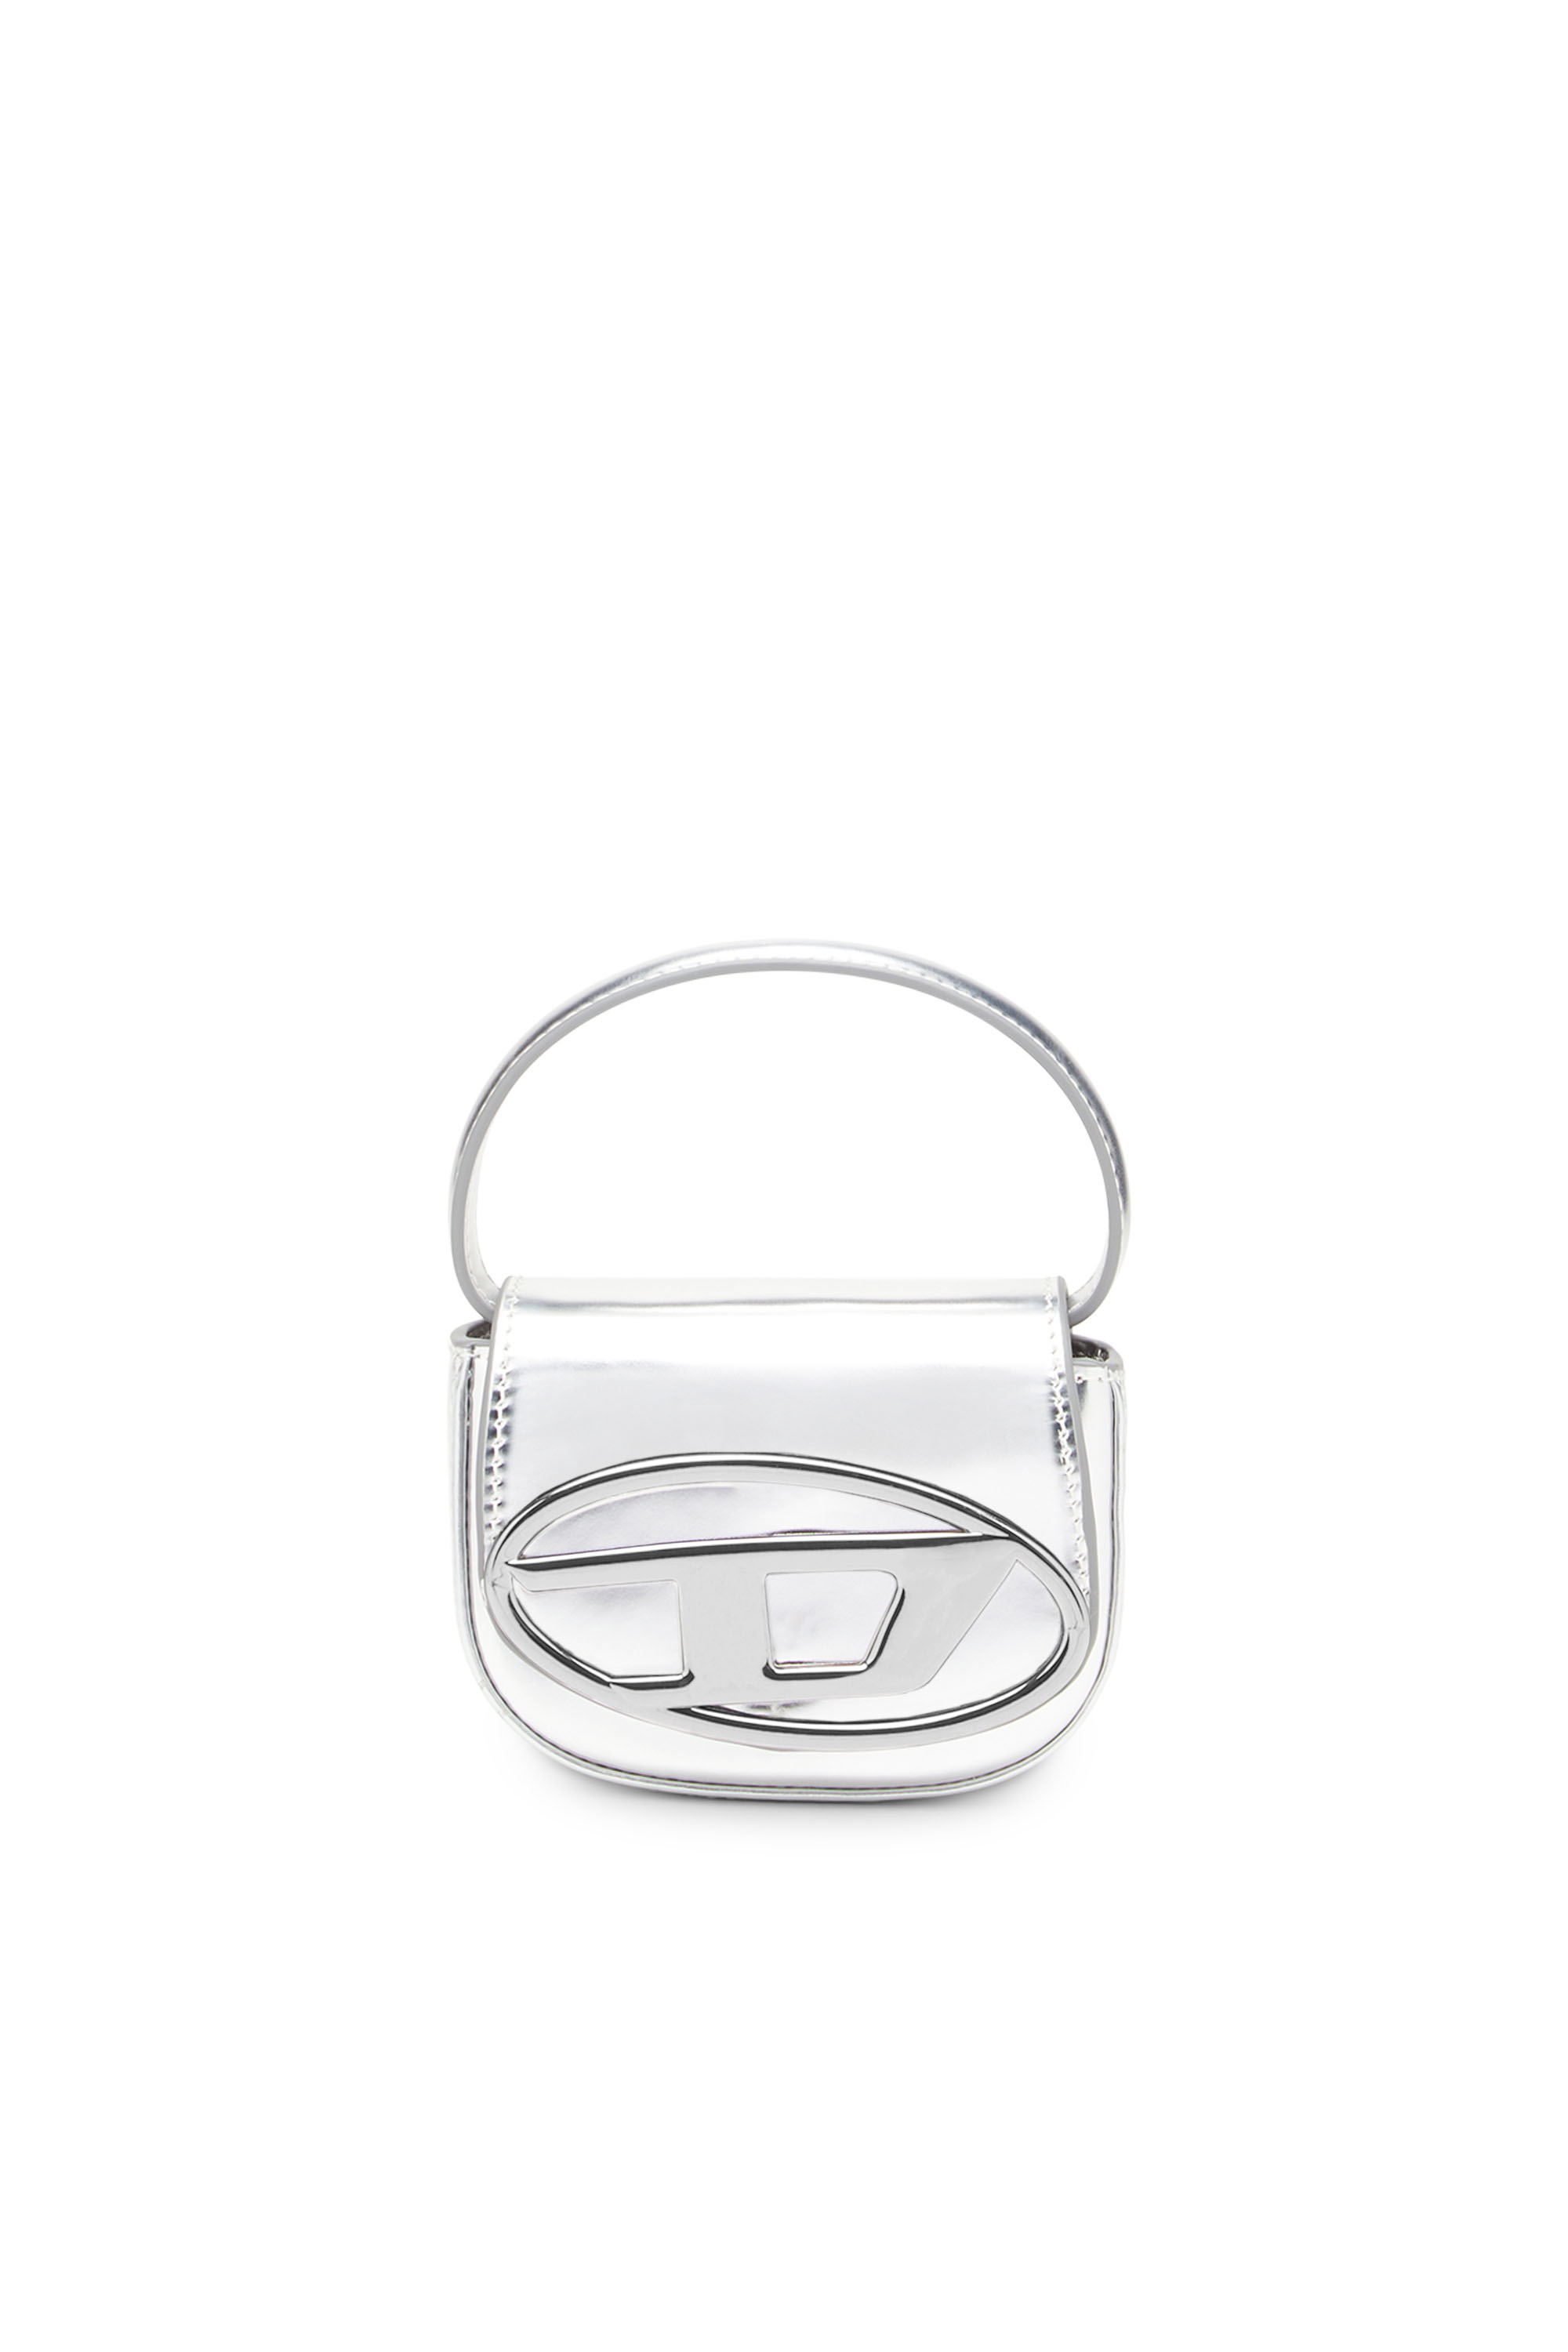 Diesel - 1DR-XS-S, Woman 1DR-XS-S-Iconic mini bag in mirrored leather in Silver - Image 2